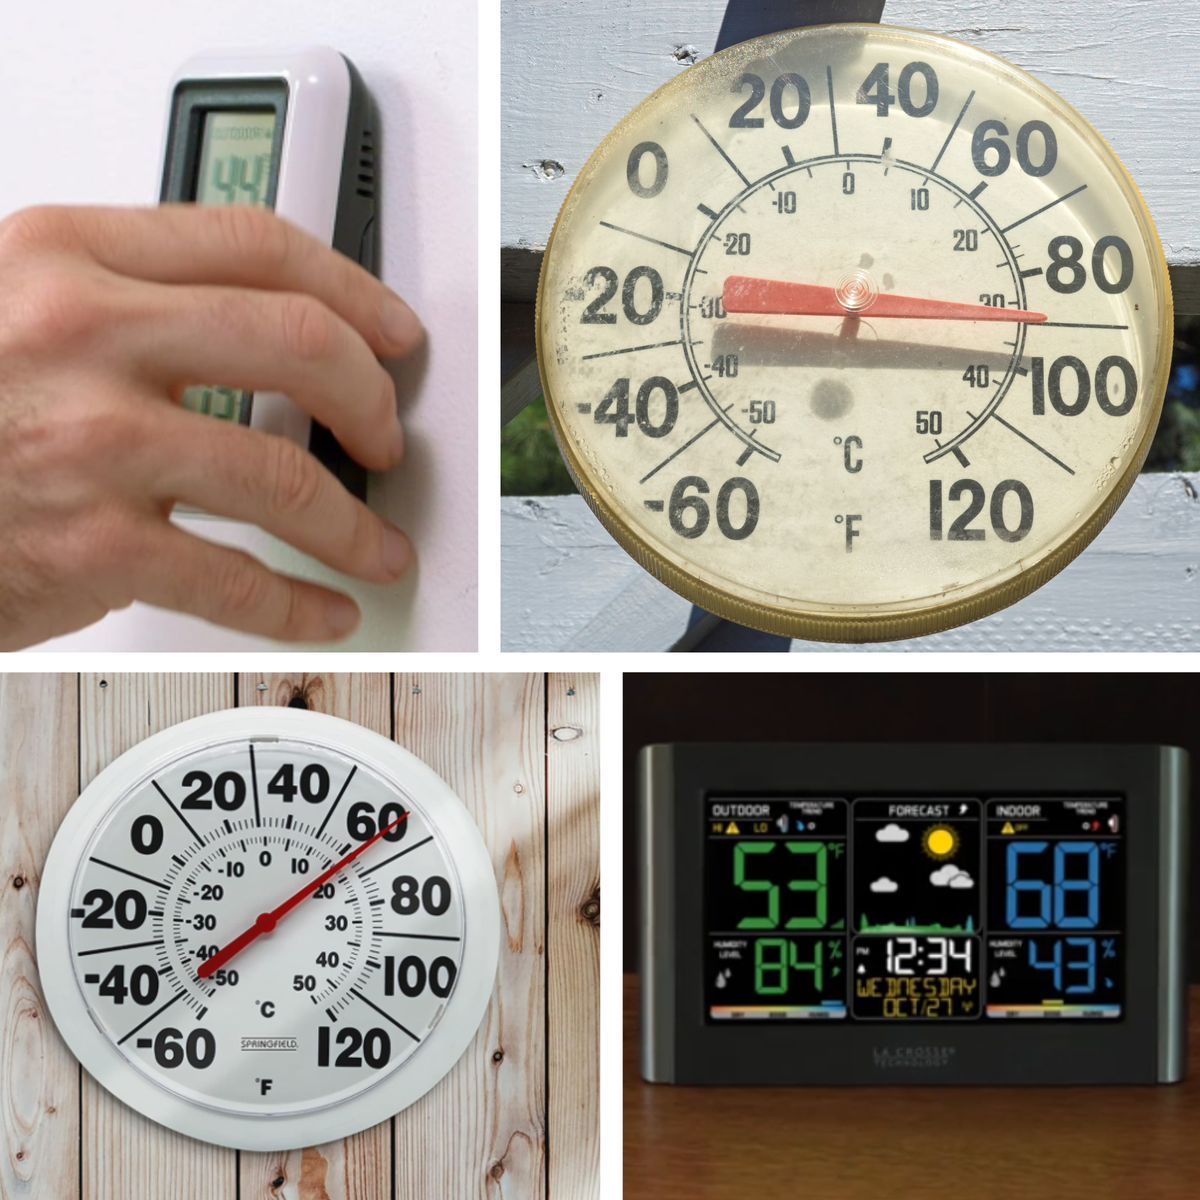 simple digita i/o thermometer, 2 analog dial thermometers and a color display weather station.